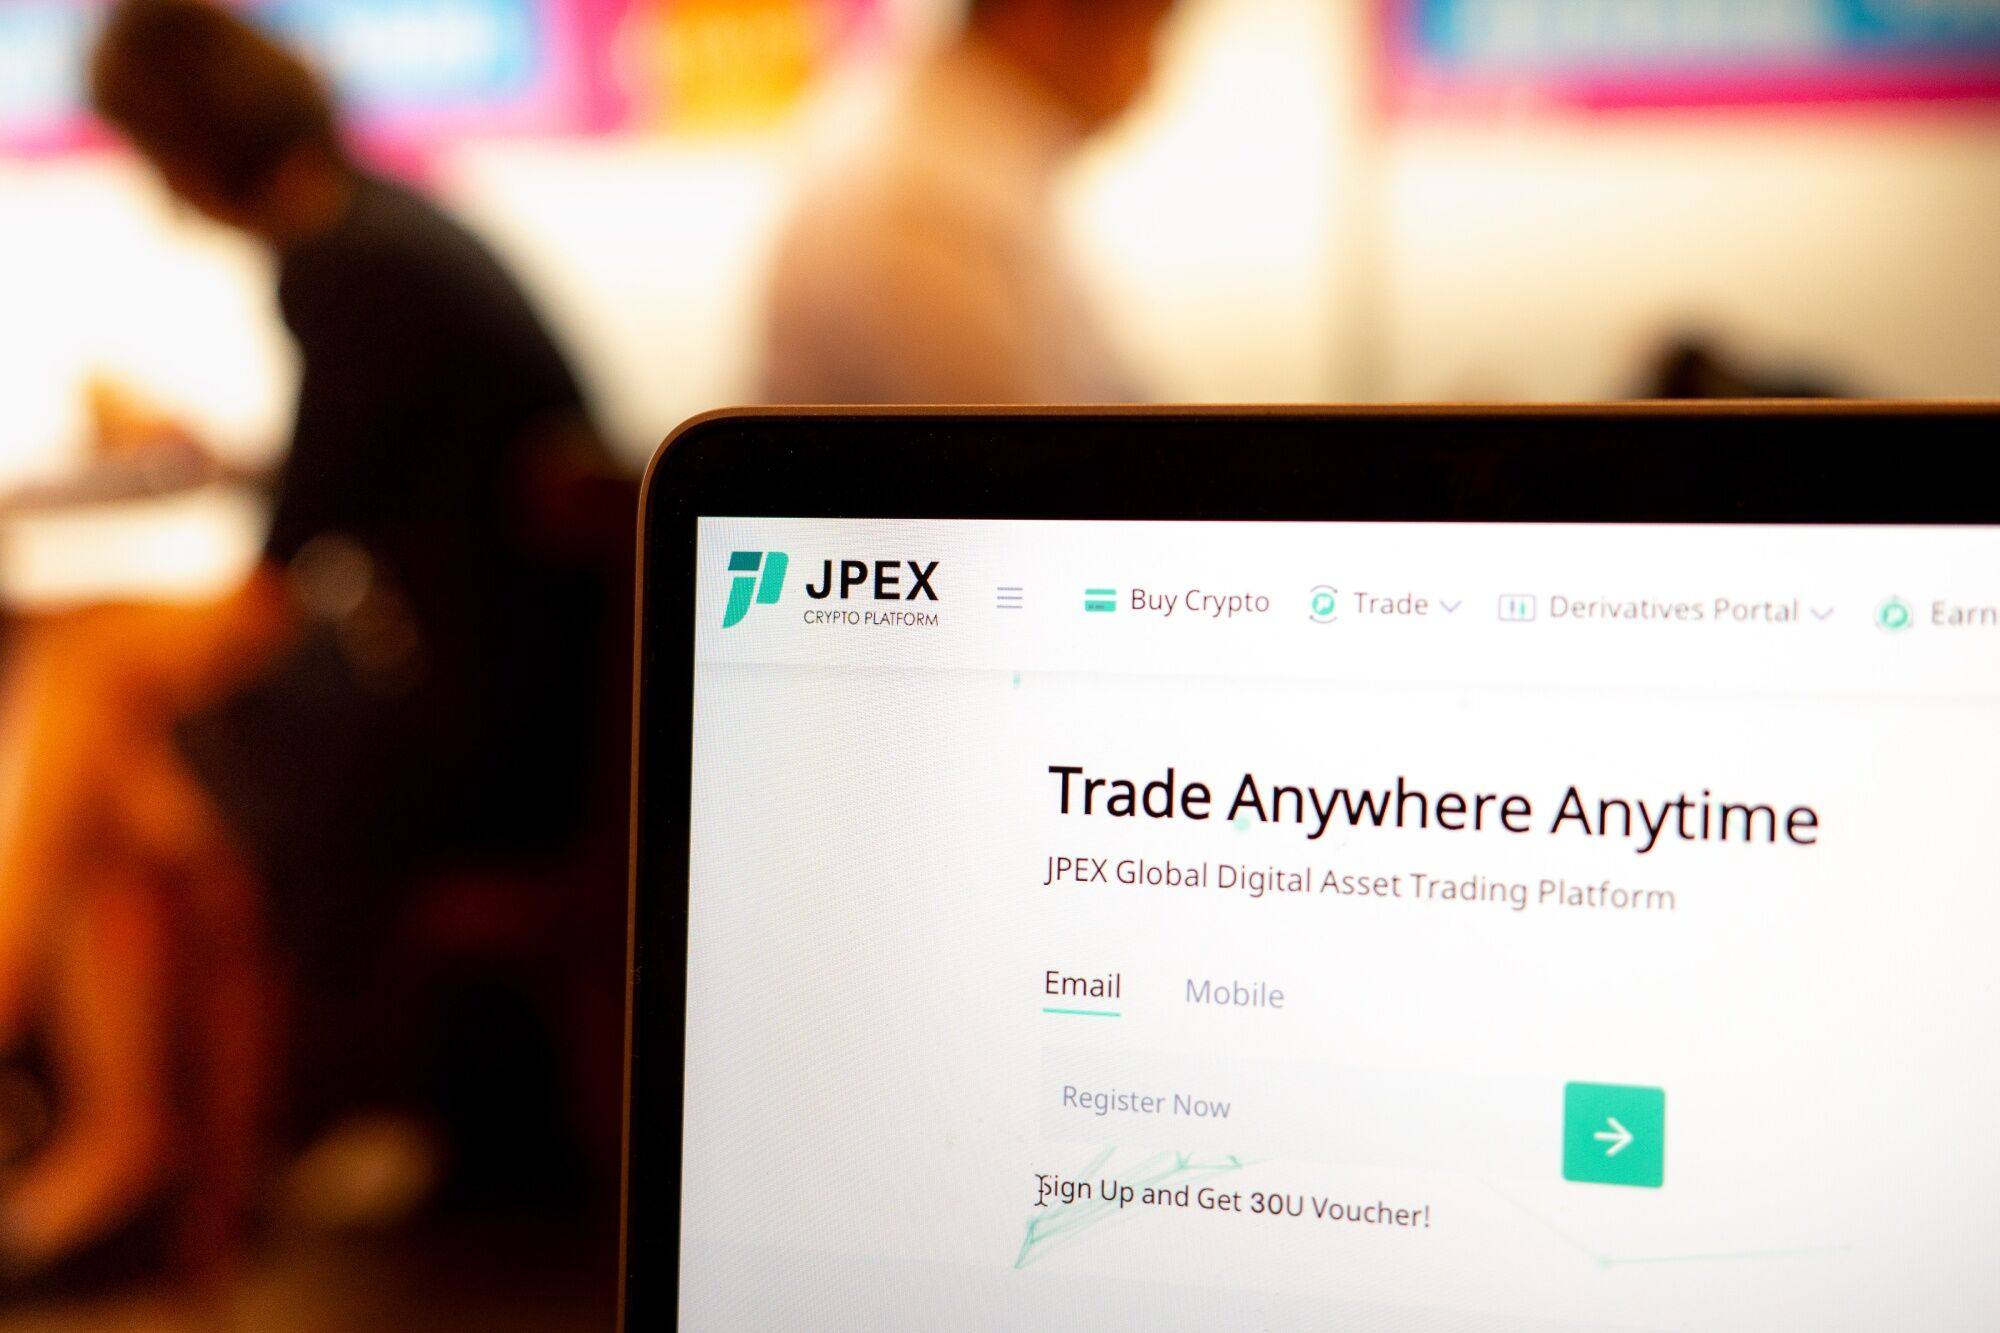 Cryptocurrency platform JPEX imploded last month after Hong Kong’s securities watchdog issued a public warning that accused the enterprise of offering “suspicious features” and spreading misleading claims about its licensing status. Photo: Bloomberg